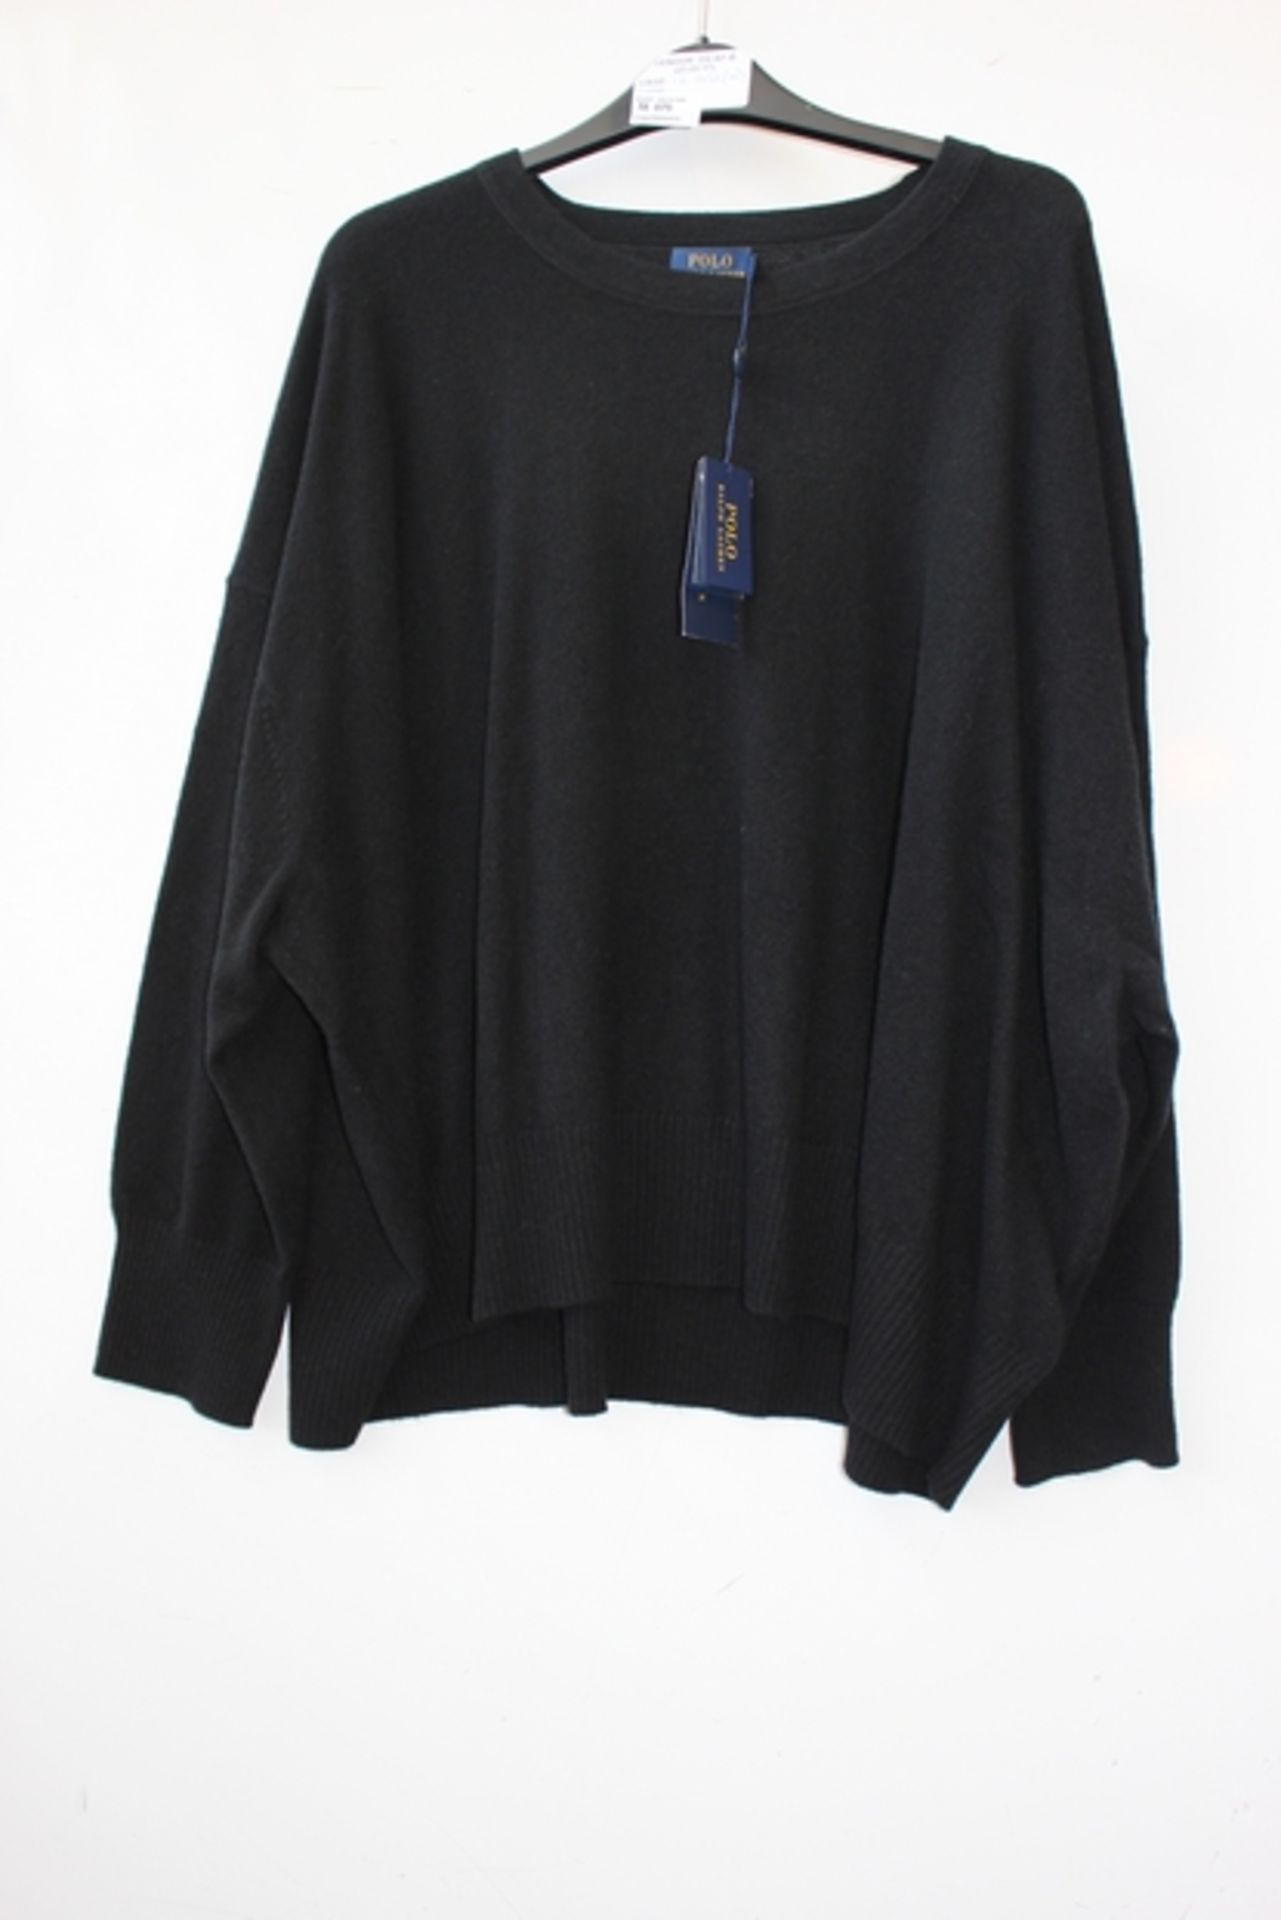 1 x BRAND NEW RALPH LAUREN JUMPER SIZE LARGE RRP £200 (12.002K) *PLEASE NOTE THAT THE BID PRICE IS